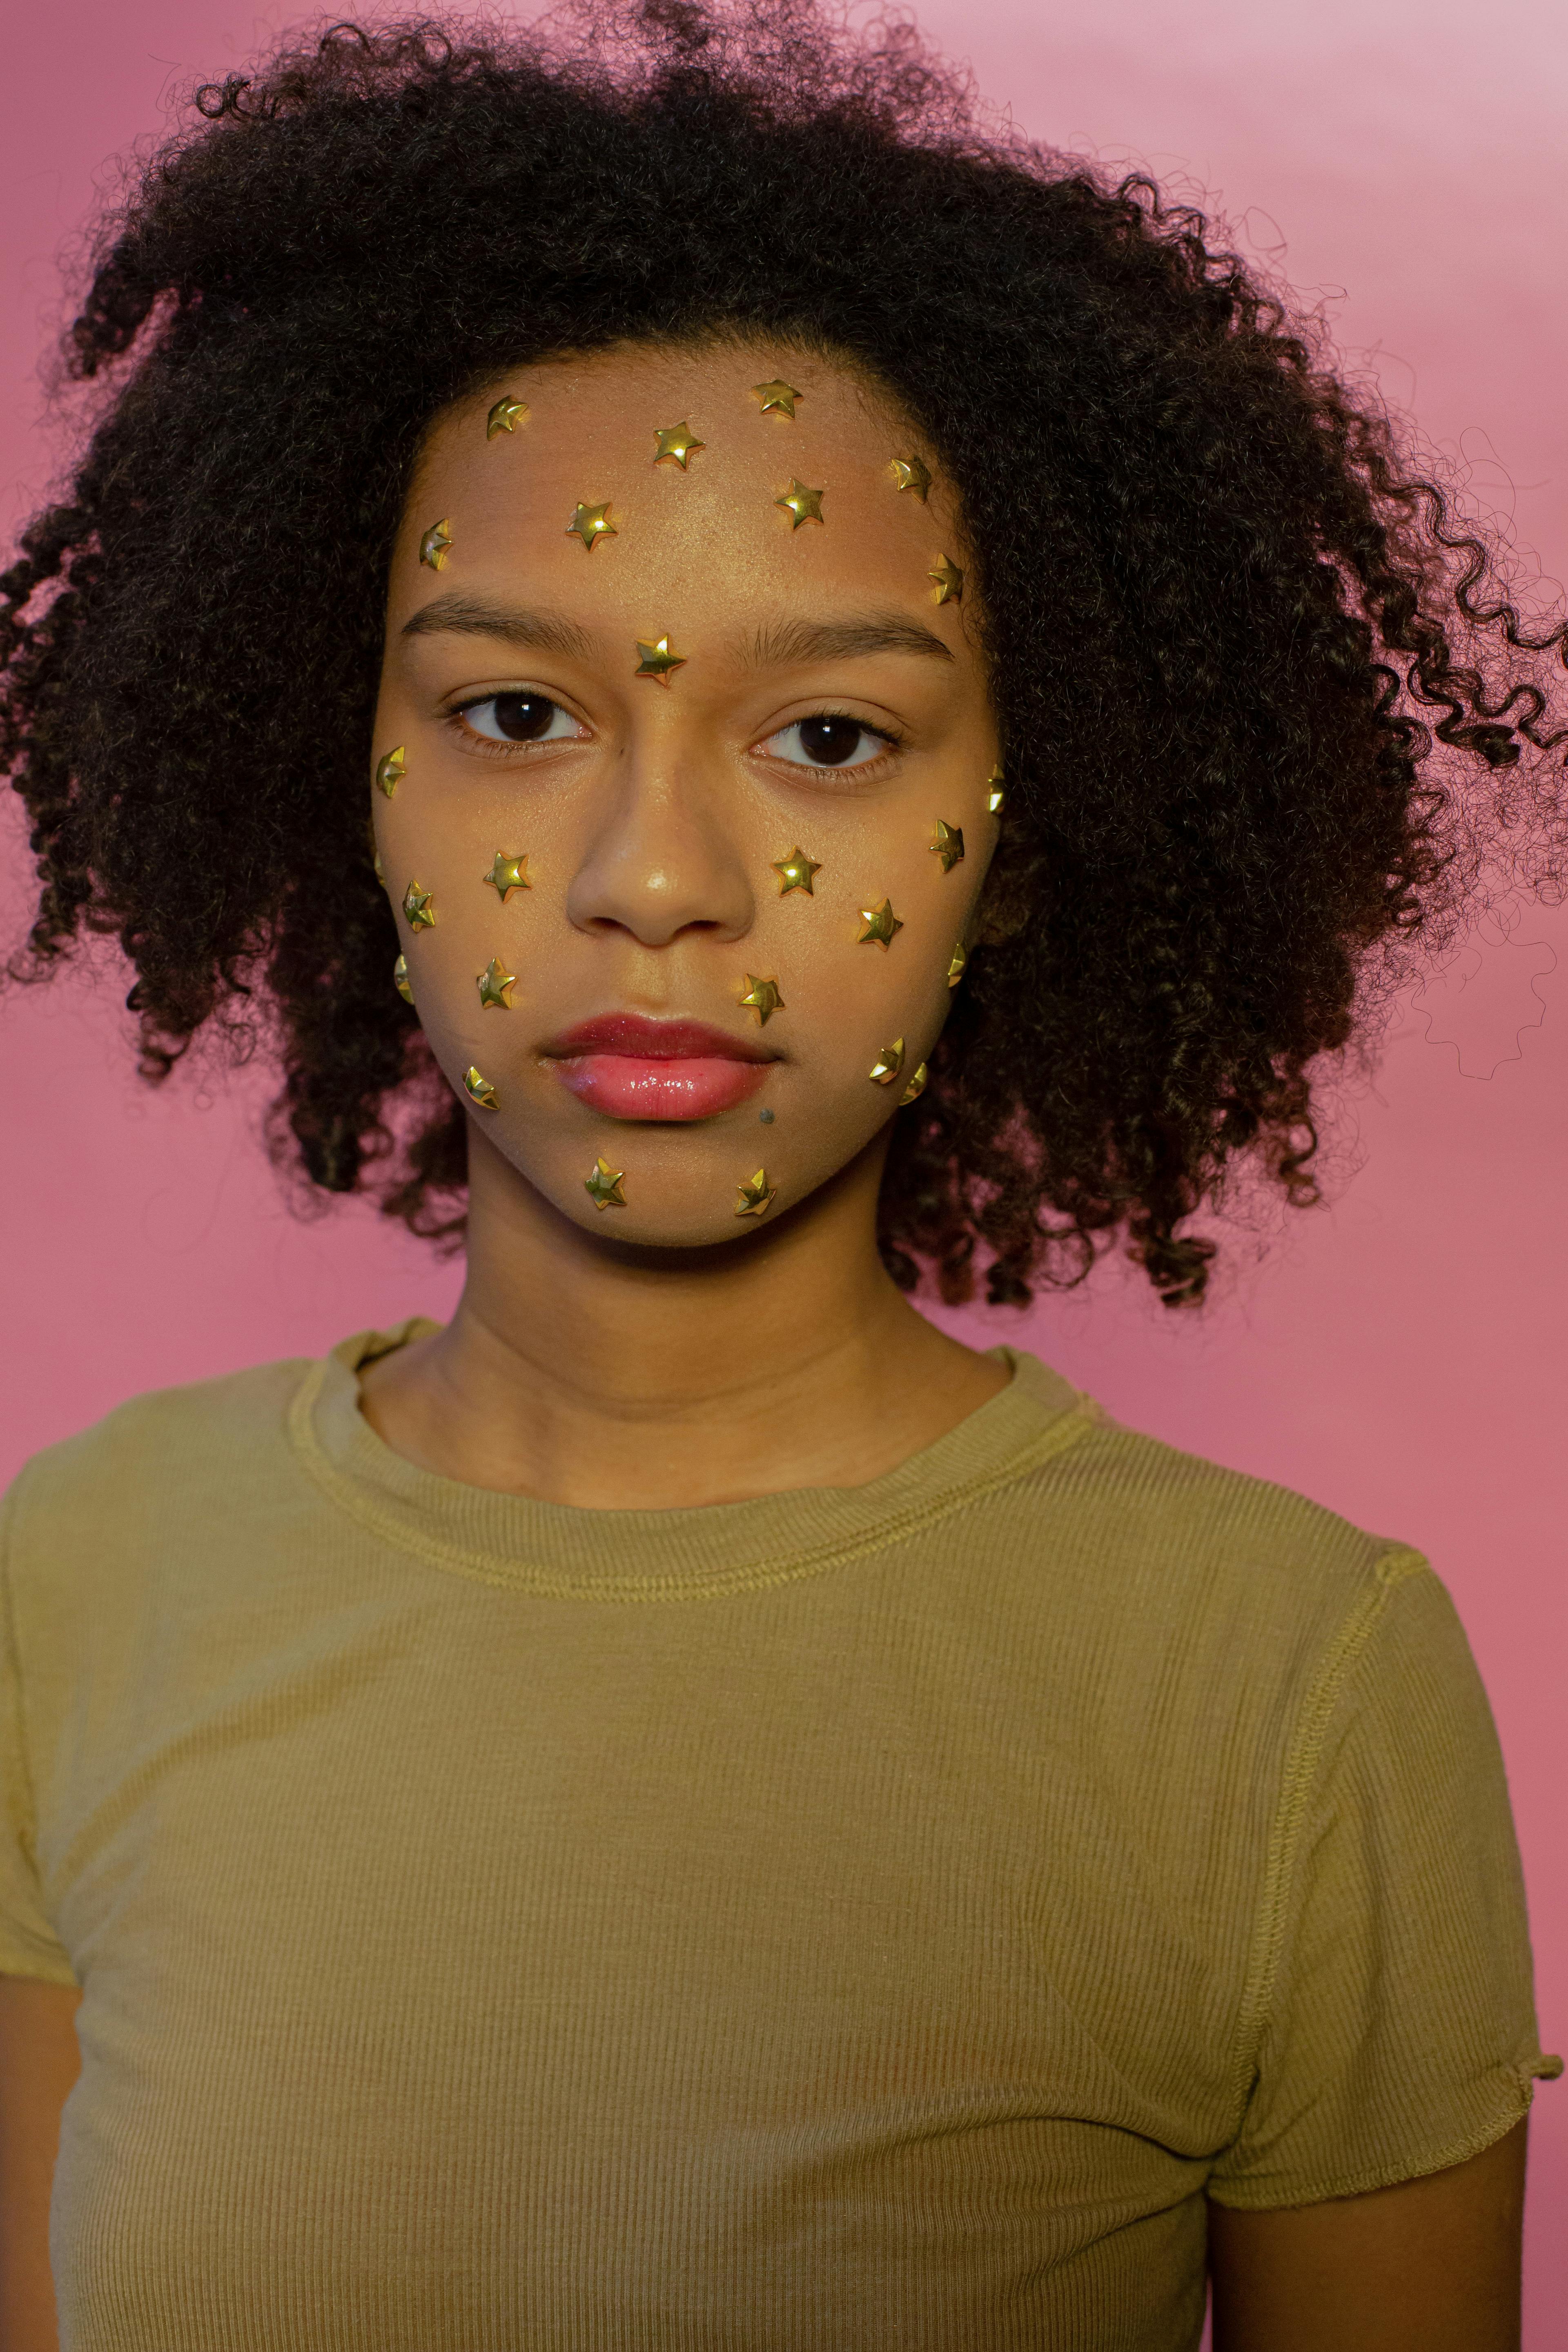 calm black girl with decorative stars on face